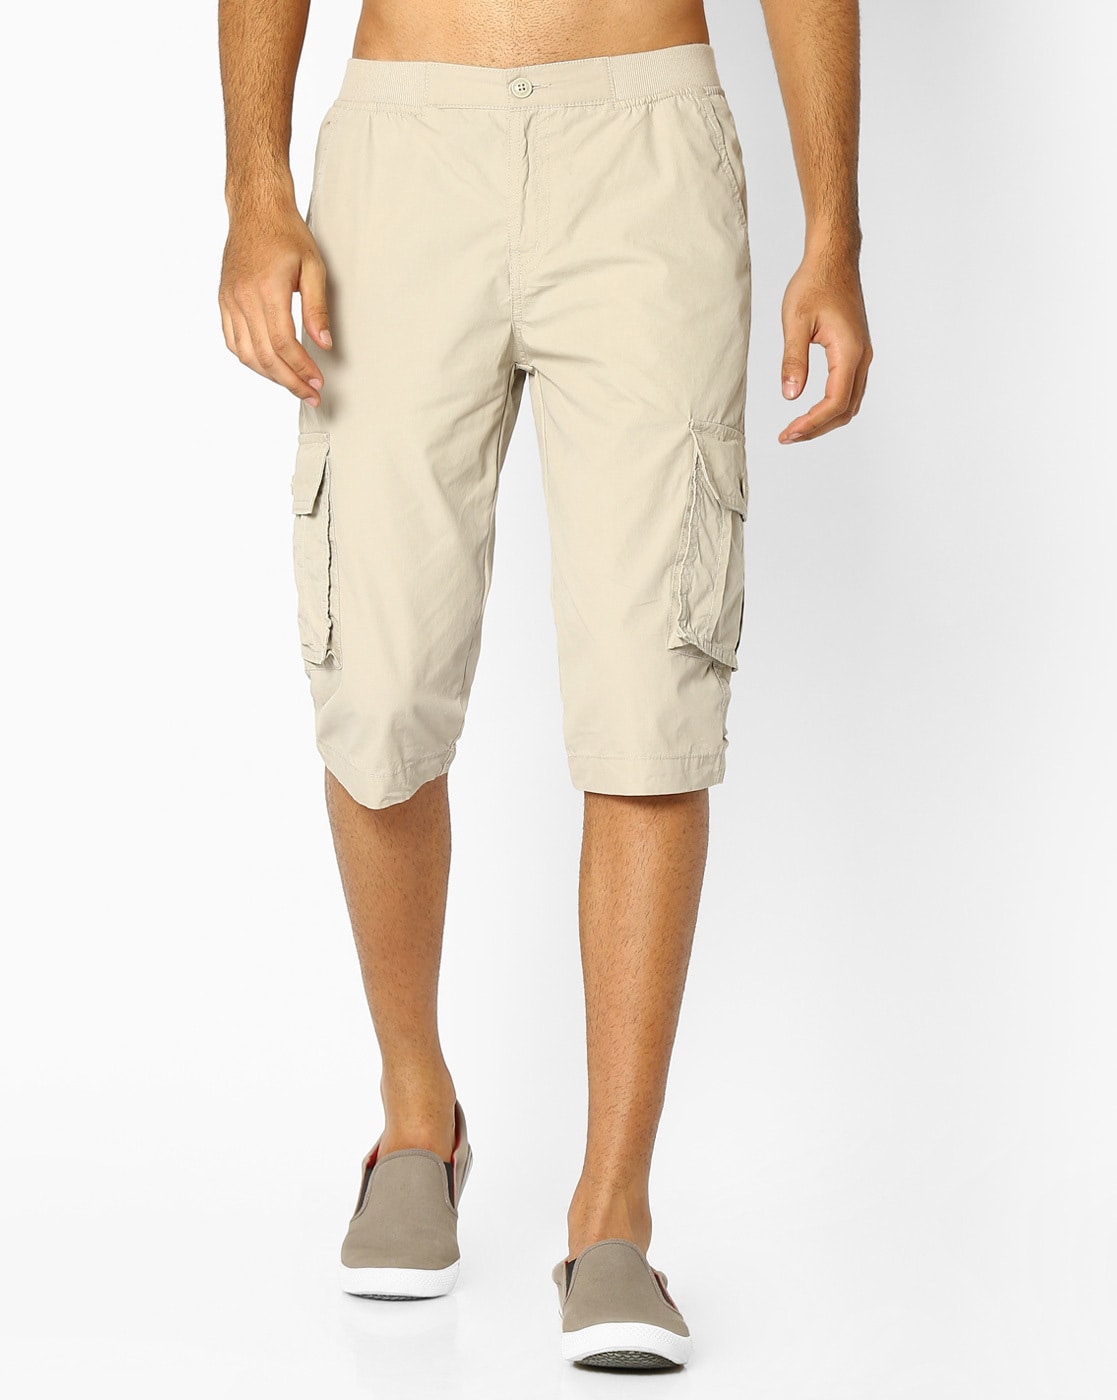 Buy NSR Mens Touring 34 Pant Online at Low Prices in India  Amazonin